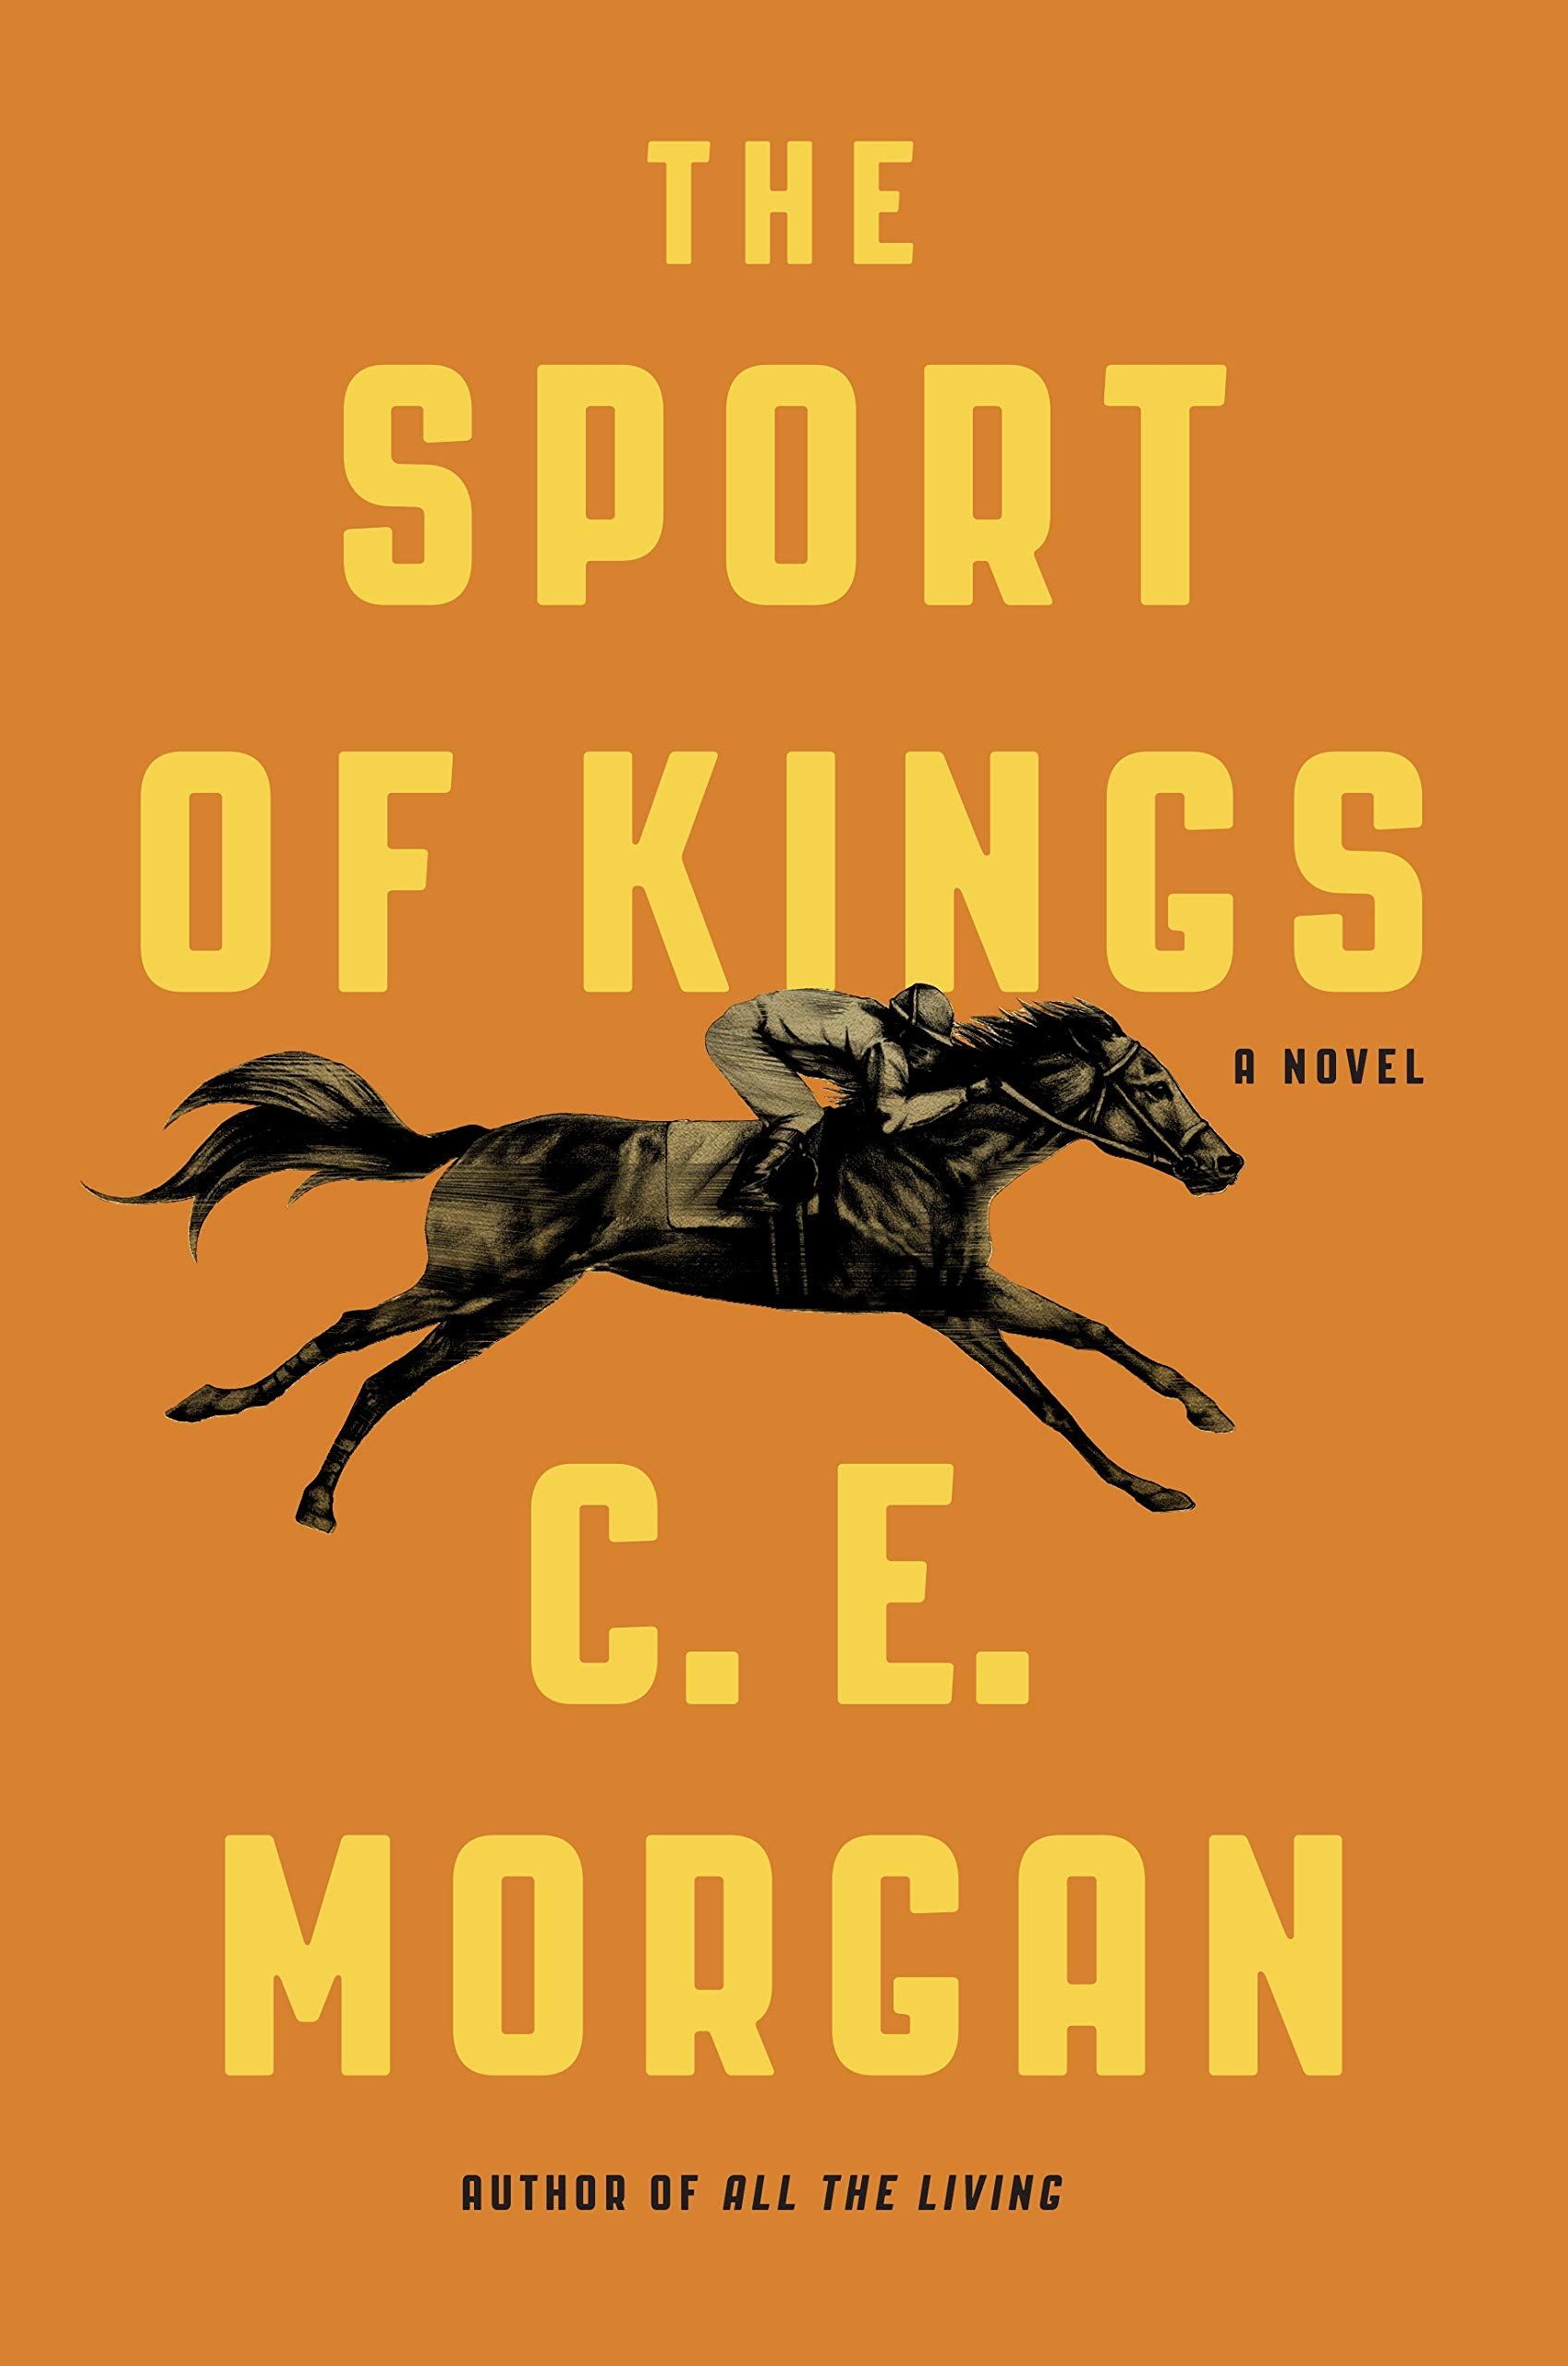 Image for "The Sport of Kings"